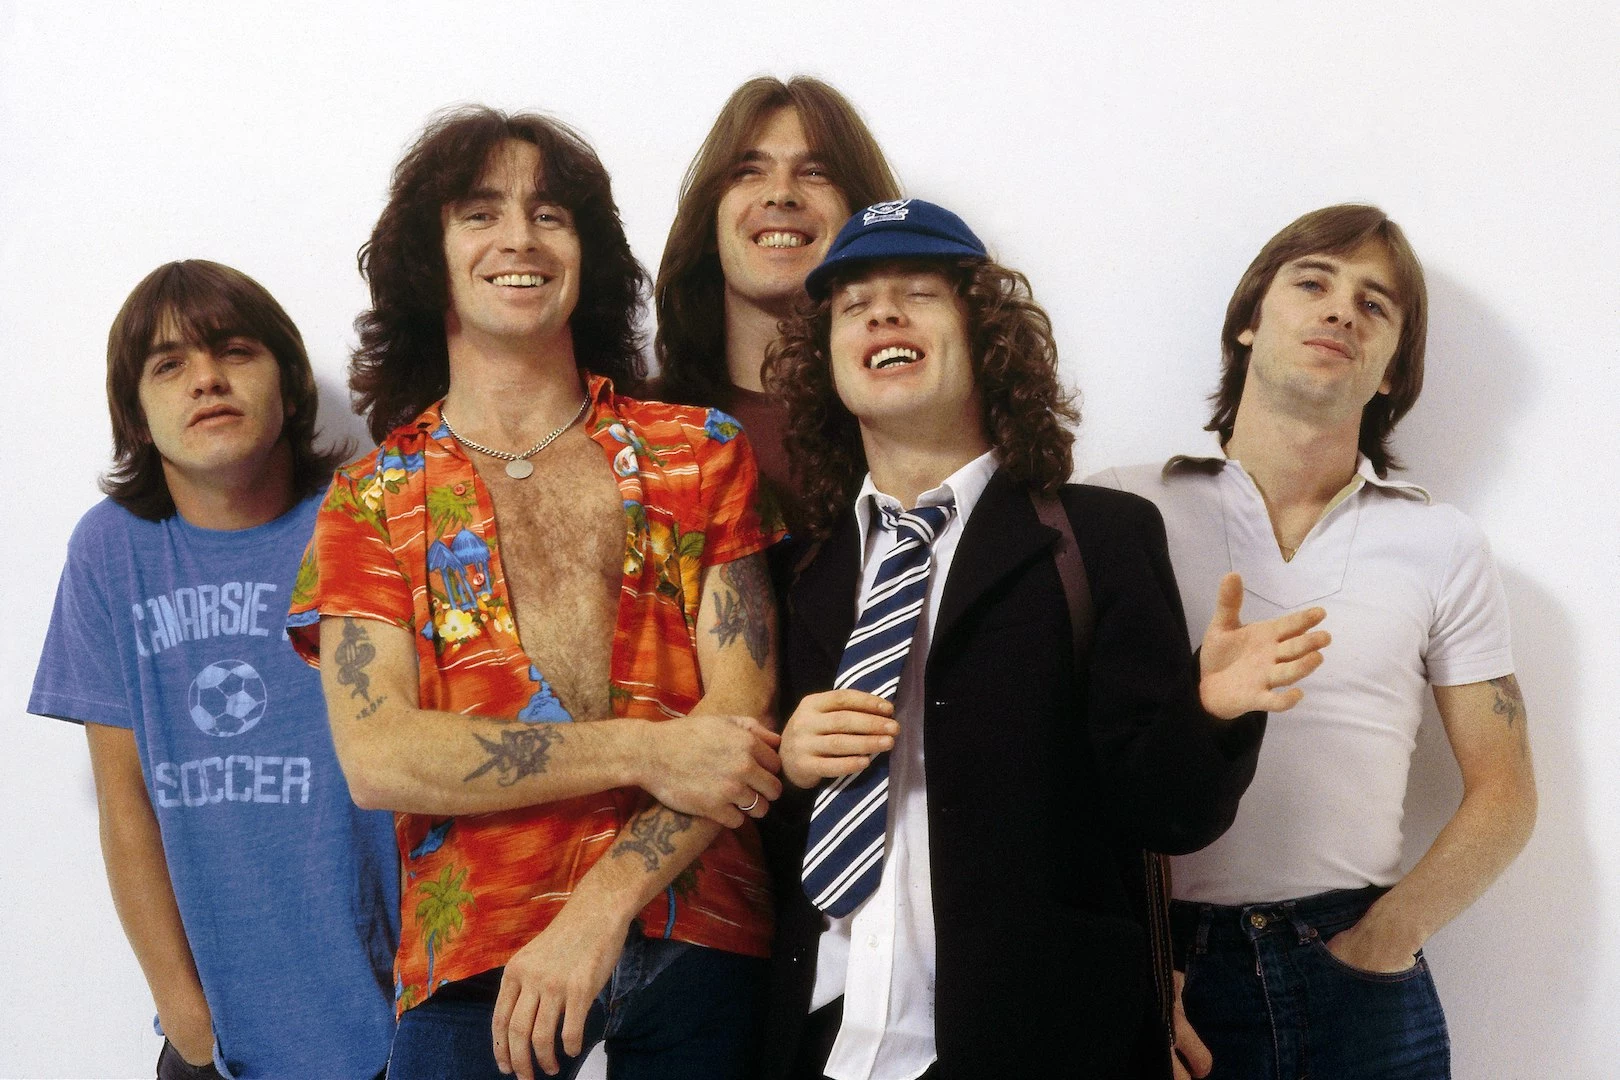 Poll: What's the AC/DC Album? - Vote Now